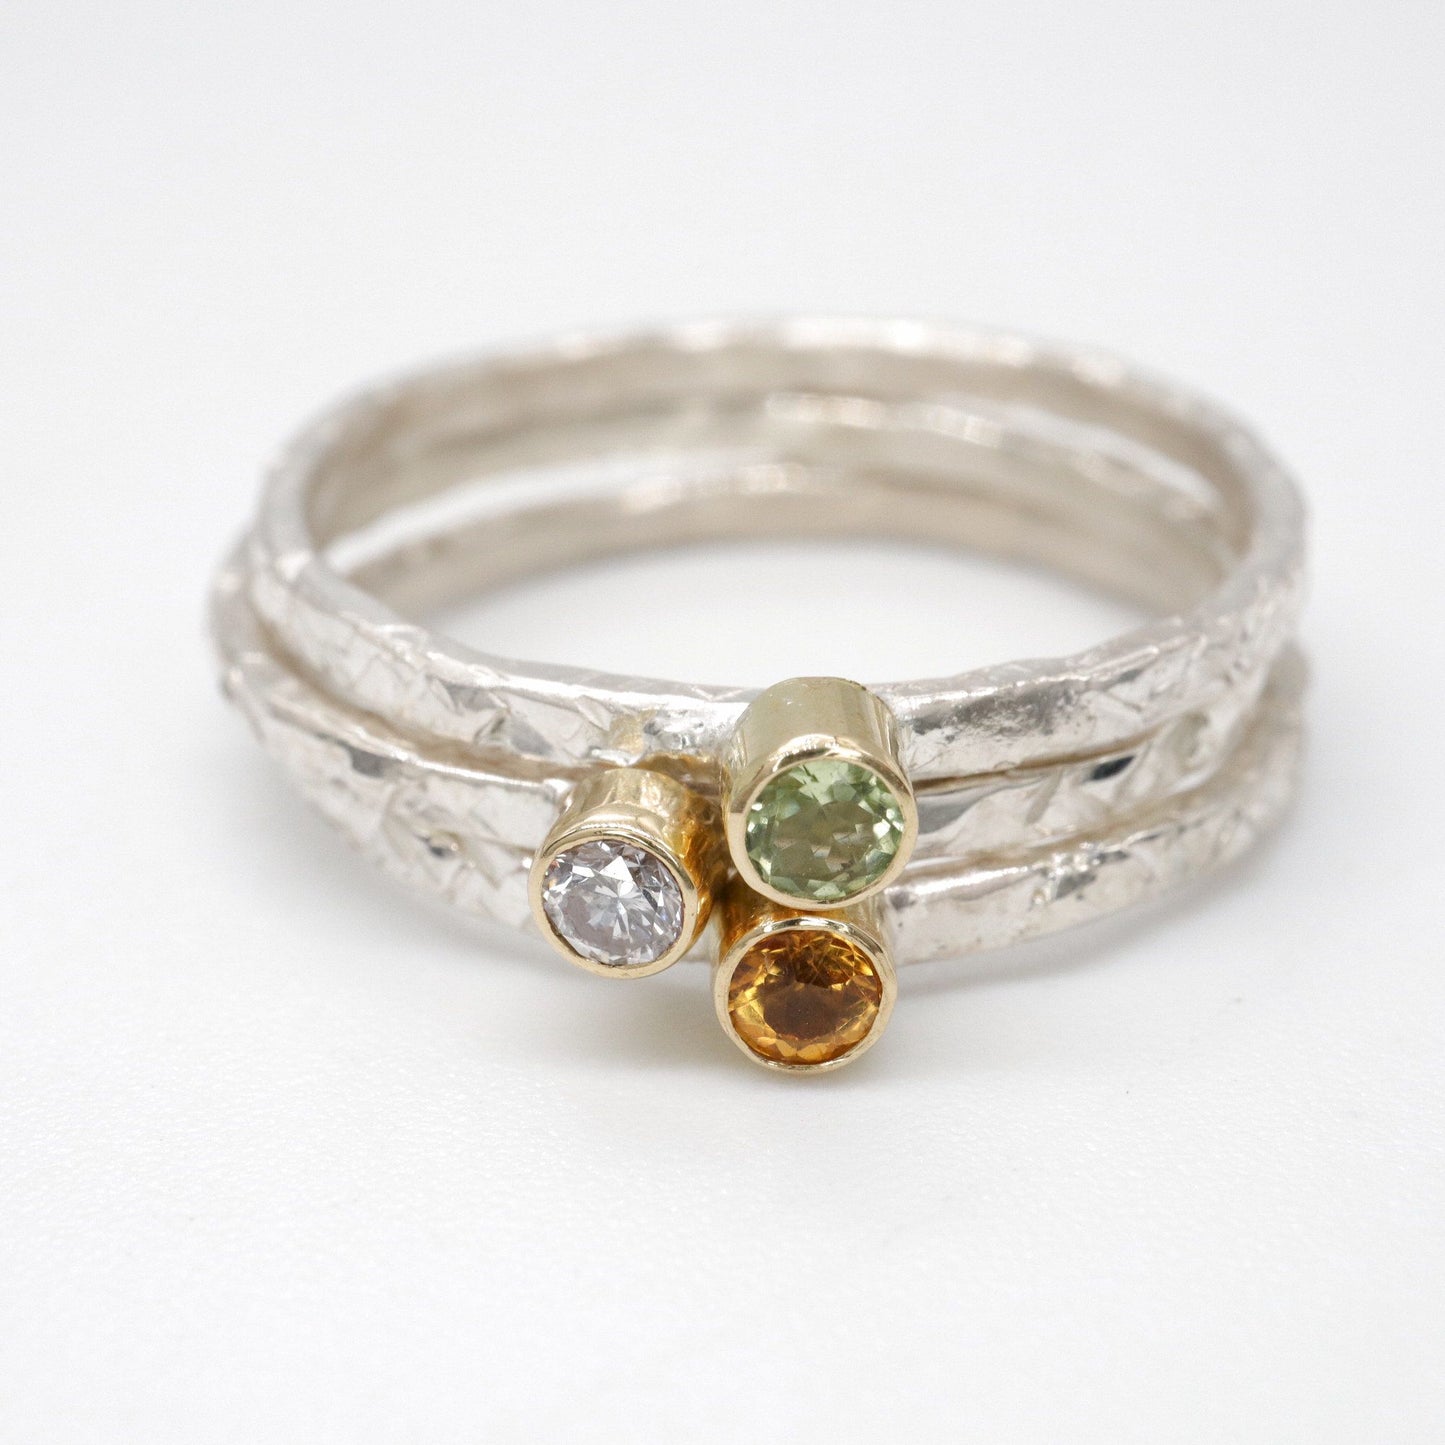 Ring set of three with peridot, diamond and citrine, Striding Edge stacking design in 18ct yellow gold and silver.